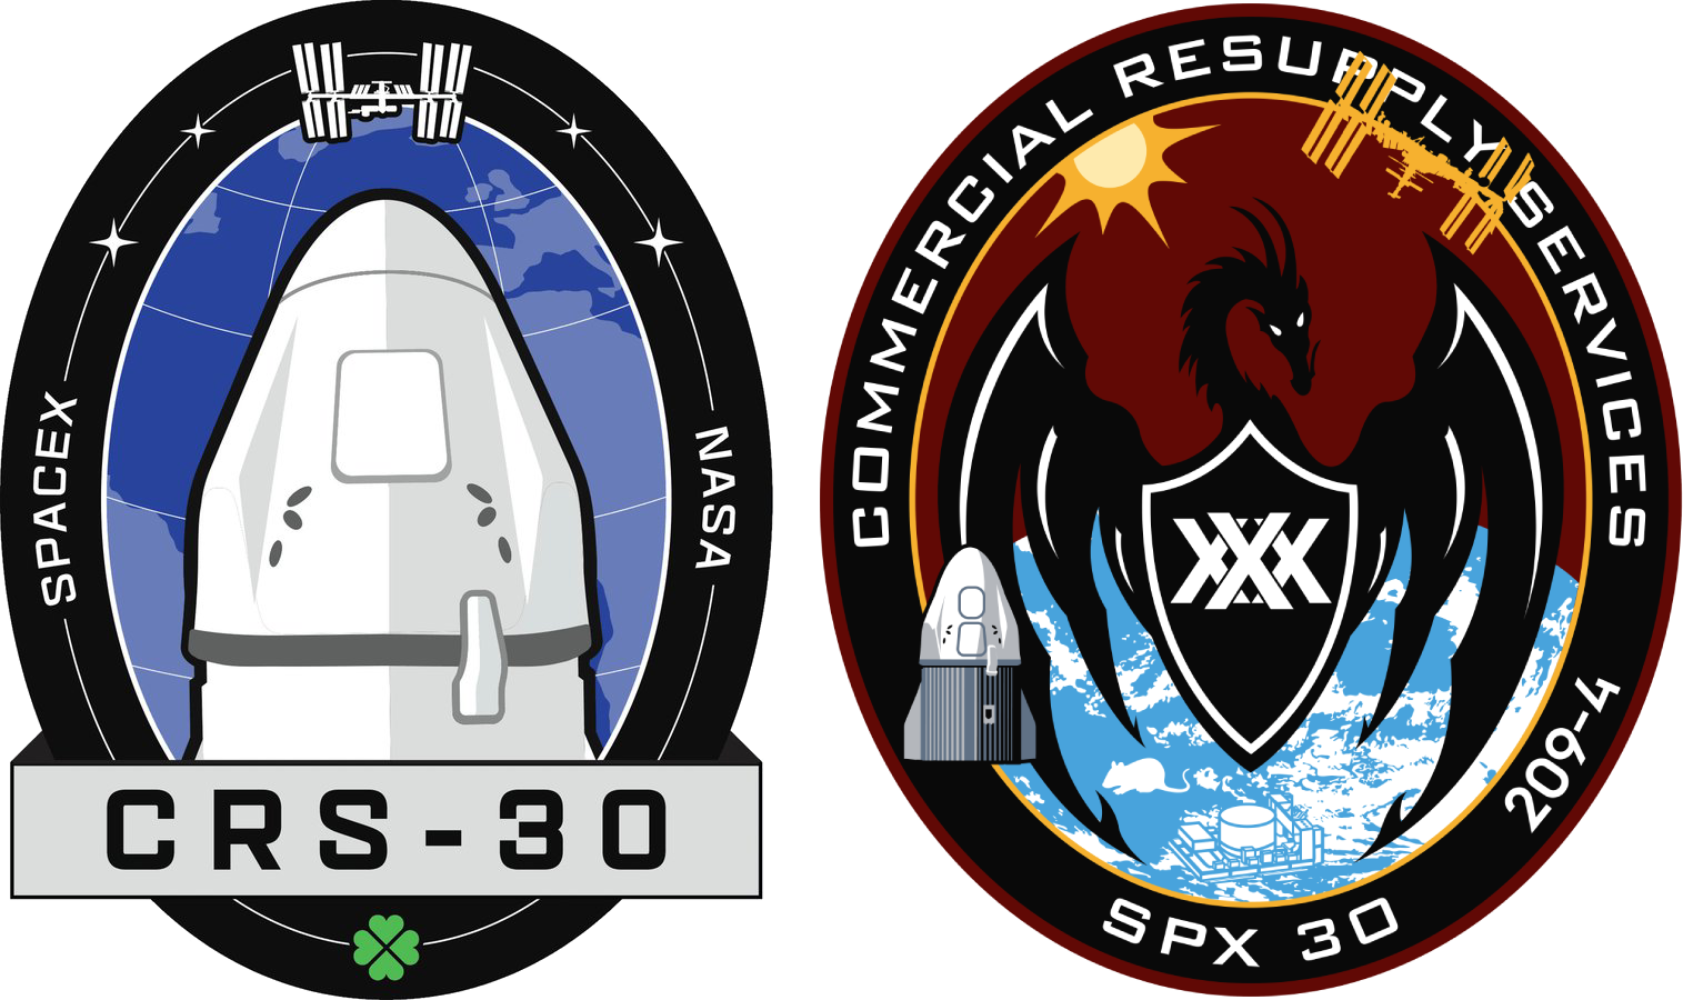 SpaceX's CRS-30 mission patch (left) and NASA's CRS-30 mission patch (right). ©SpaceX/NASA